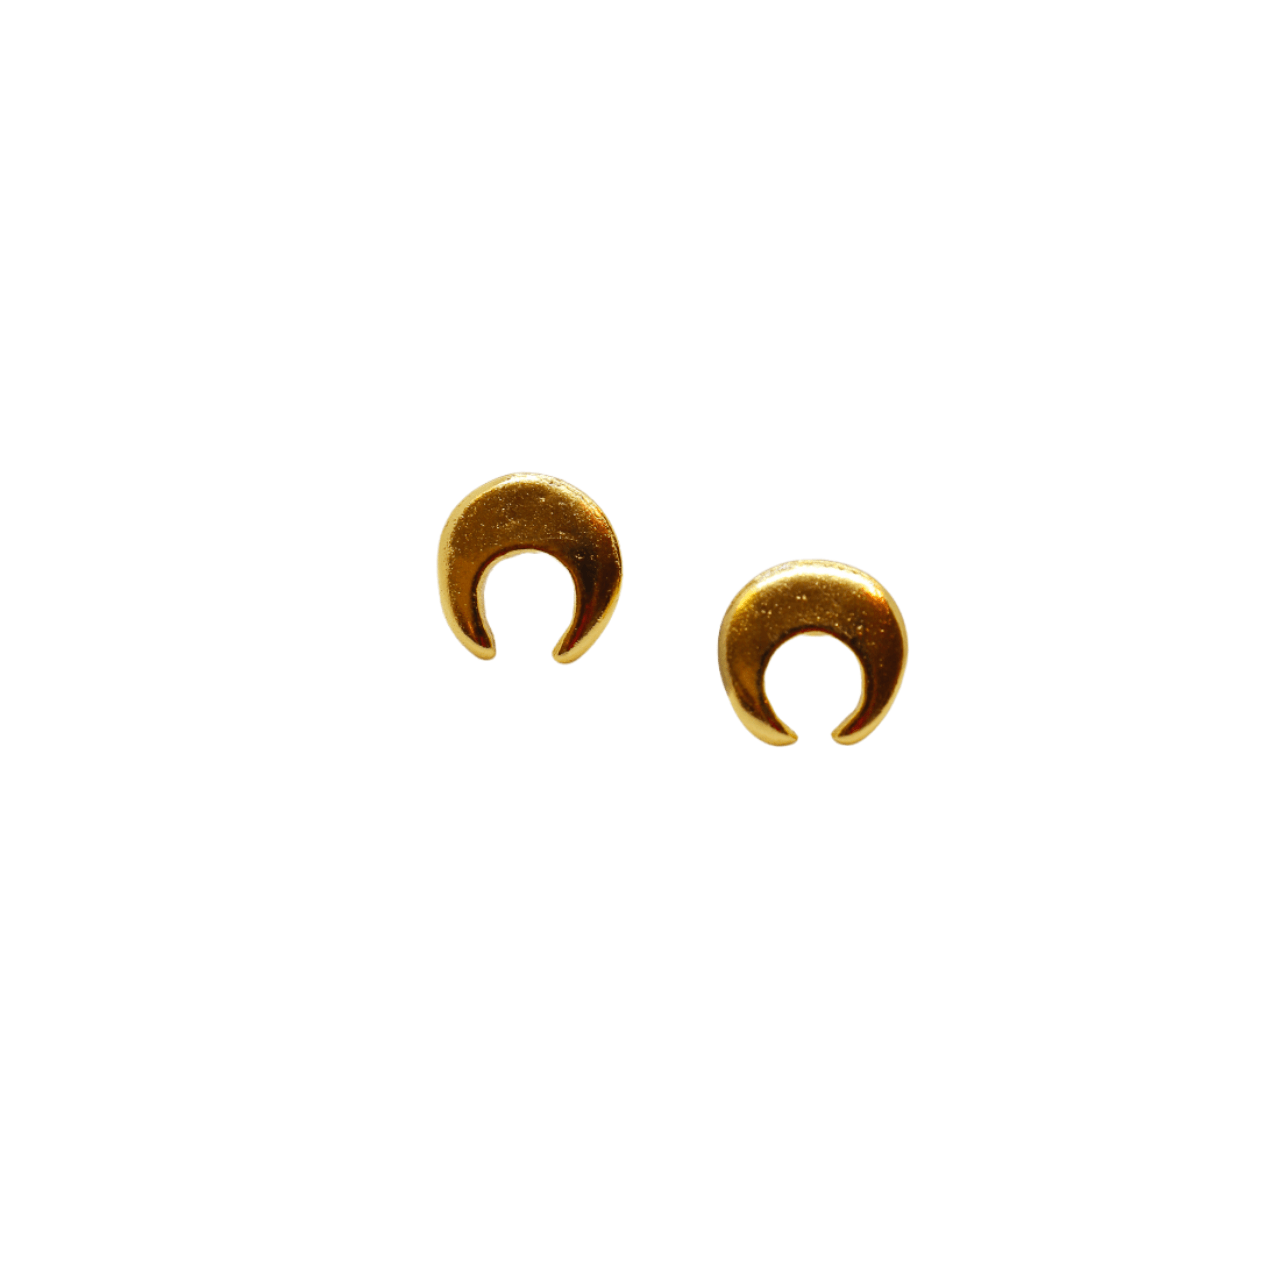 Handcrafted 24K gold plated studs earrings, inspired by ancient Pre-Colombian motifs. Ideal for daily wear or gifting on special occasions like Mother's Day, anniversaries, or birthdays